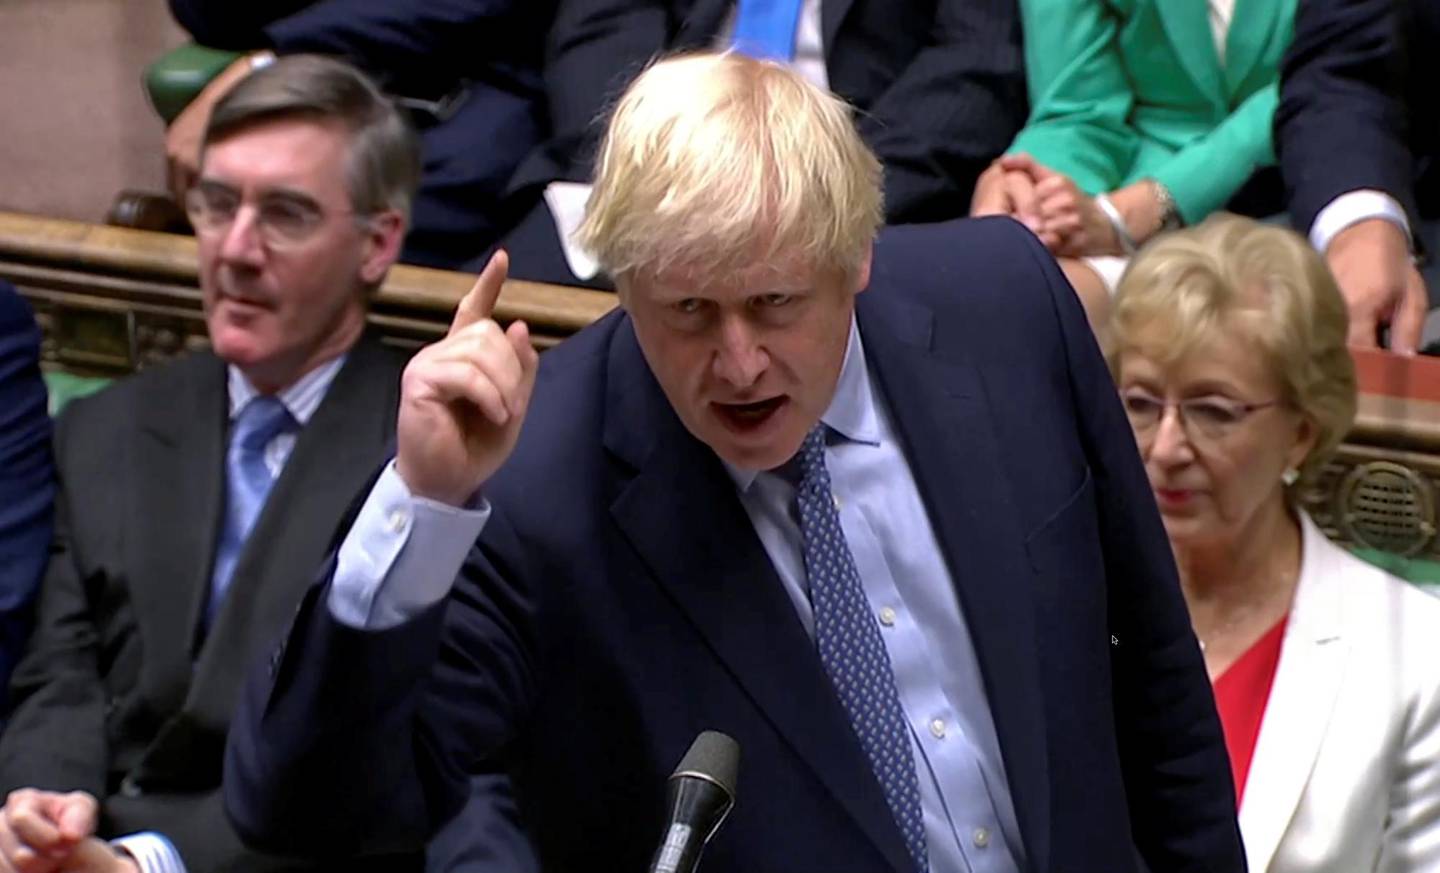 Britain's Prime Minister Boris Johnson gestures as he speaks at the parliament, which reconvenes after the UK Supreme Court ruled that his suspension of the parliament was unlawful, in London, Britain, September 25, 2019, in this screen grab taken from video. Parliament TV via REUTERS